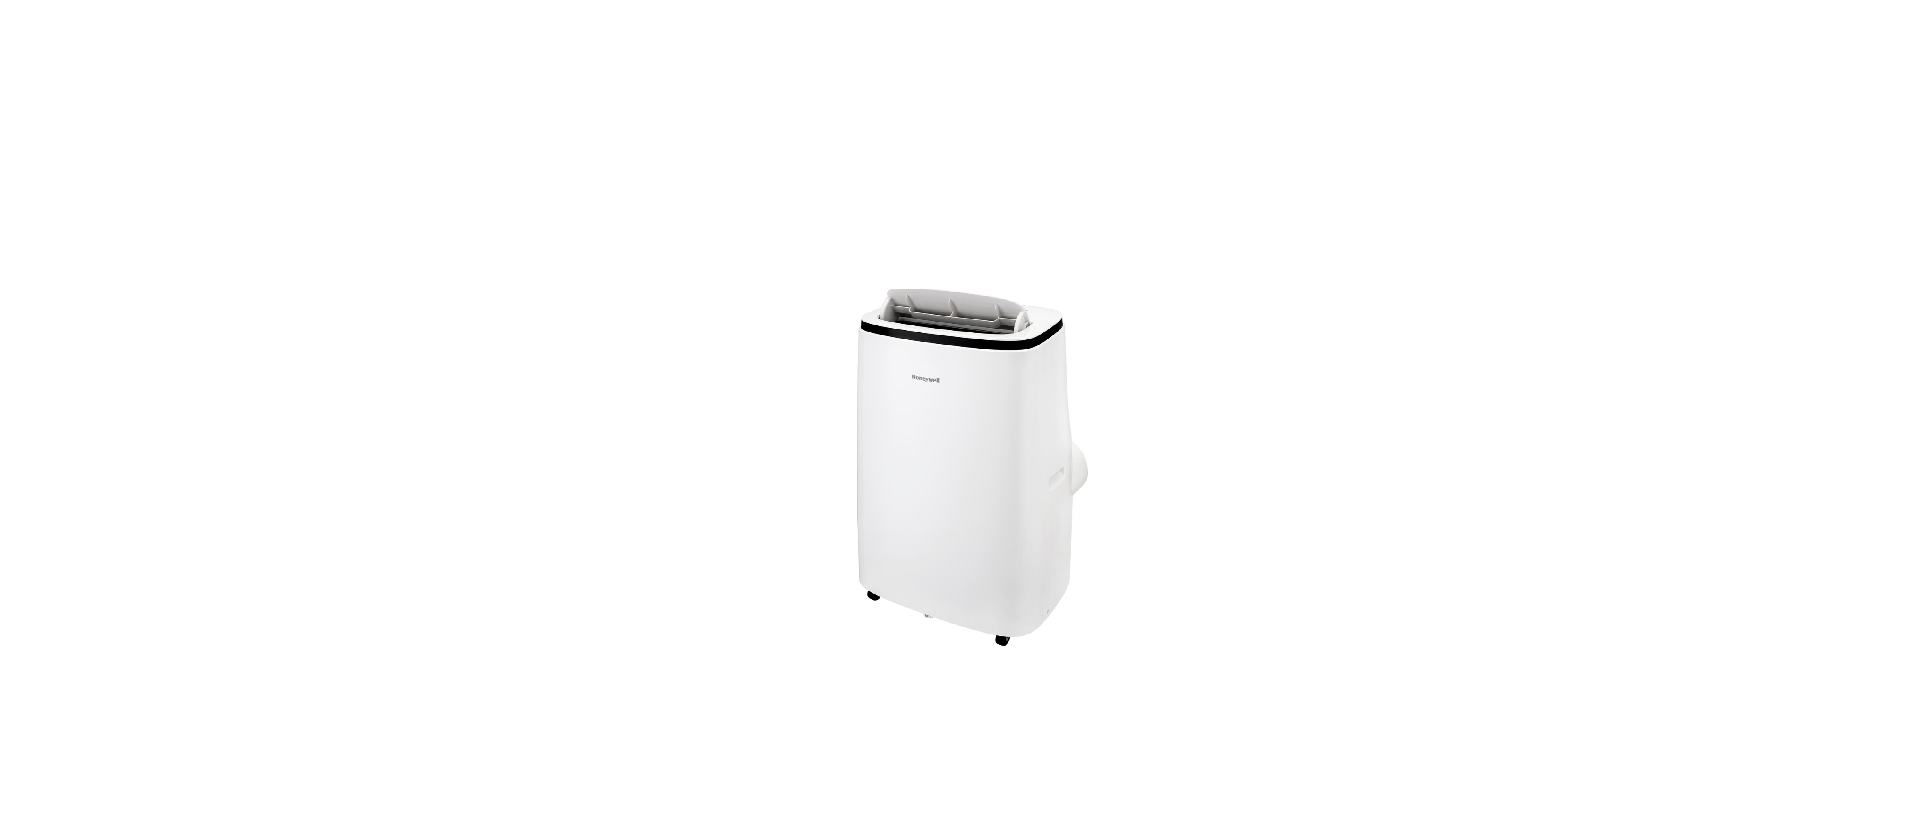 Honey-Well-HJ0CESWK7-Portable-Air-Conditioner-FEATURE